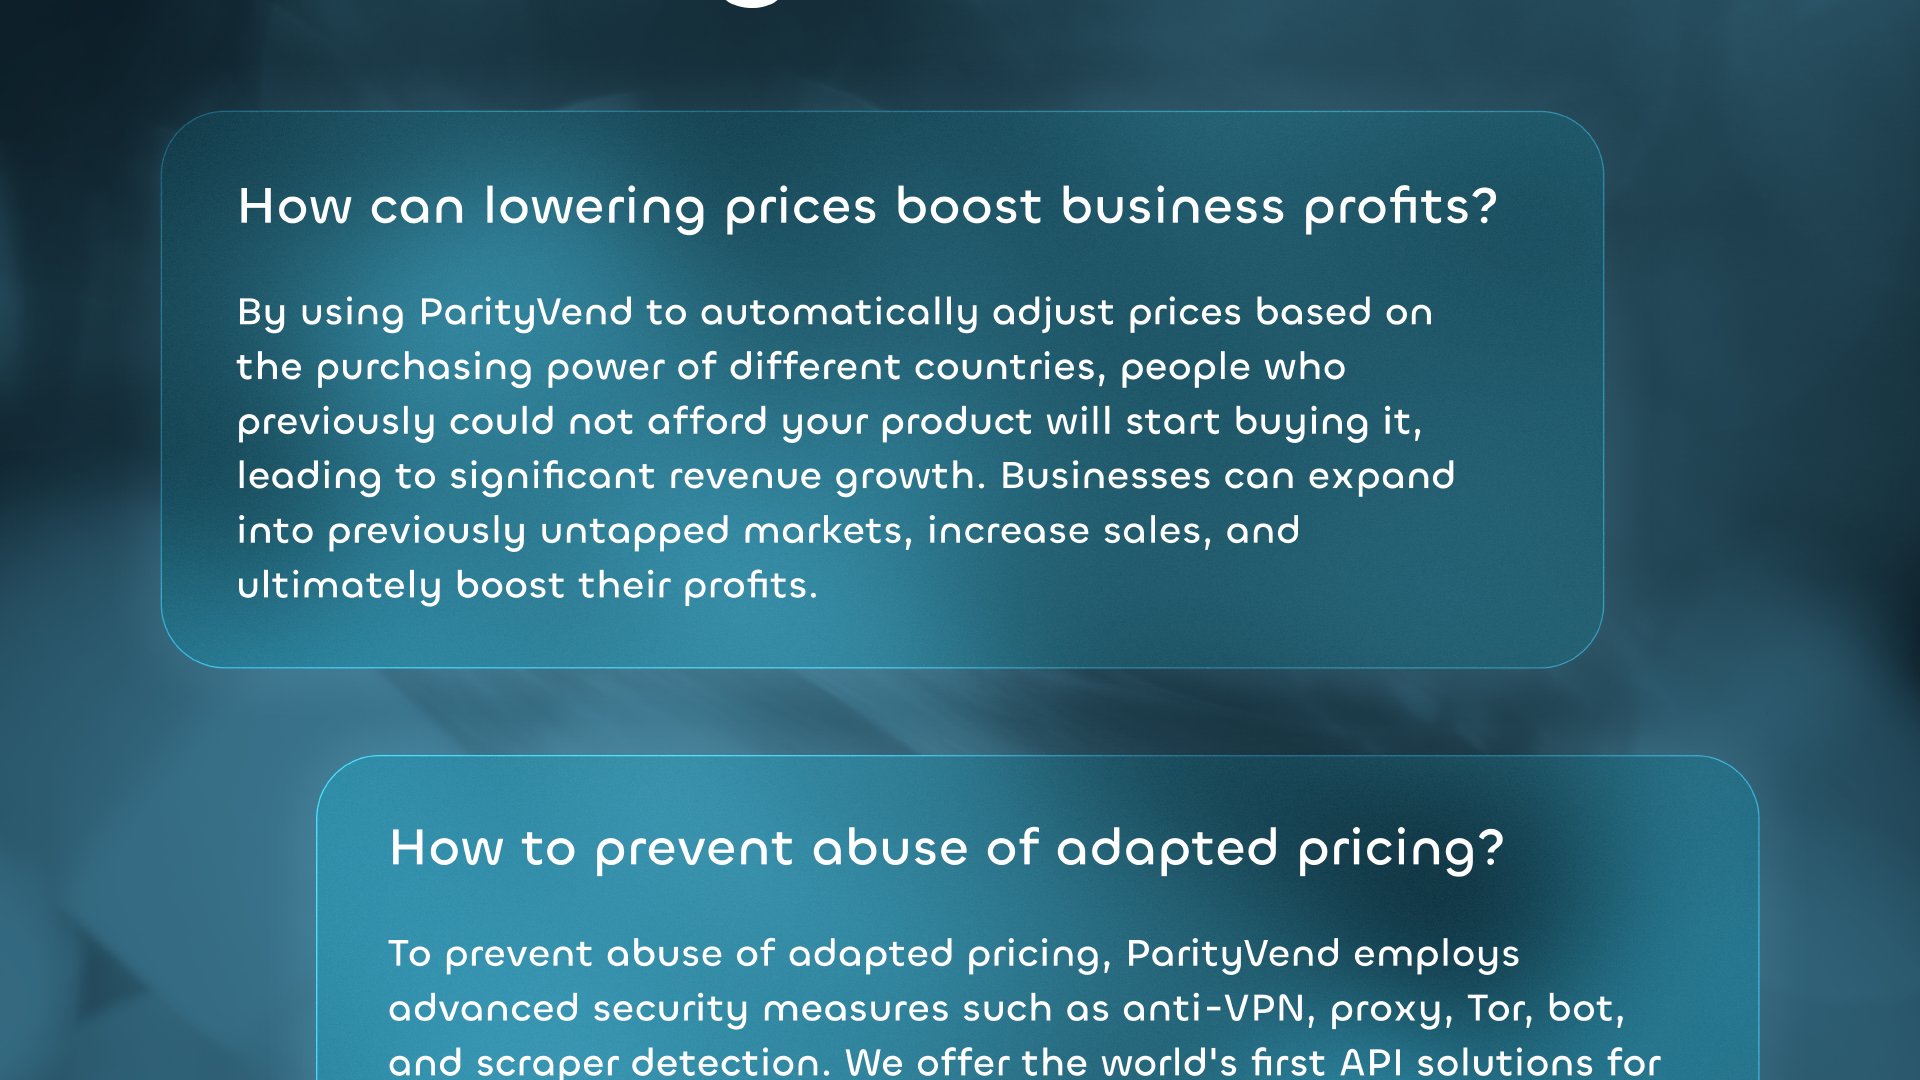 'How can lowering prices boost business profits?': By using ParityVend to automatically adjust prices based on the purchasing power of different countries, people who previously could not afford your product will start buying it, leading to significant revenue growth. Businesses can expand into previously untapped markets, increase sales, and ultimately boost their profits. 'How to prevent abuse of adapted pricing?': To prevent abuse of adapted pricing, ParityVend employs advanced security measures such as anti-VPN, proxy, Tor, bot, and scraper detection. We offer the world's first API solutions for dynamic pricing and global market expansion.